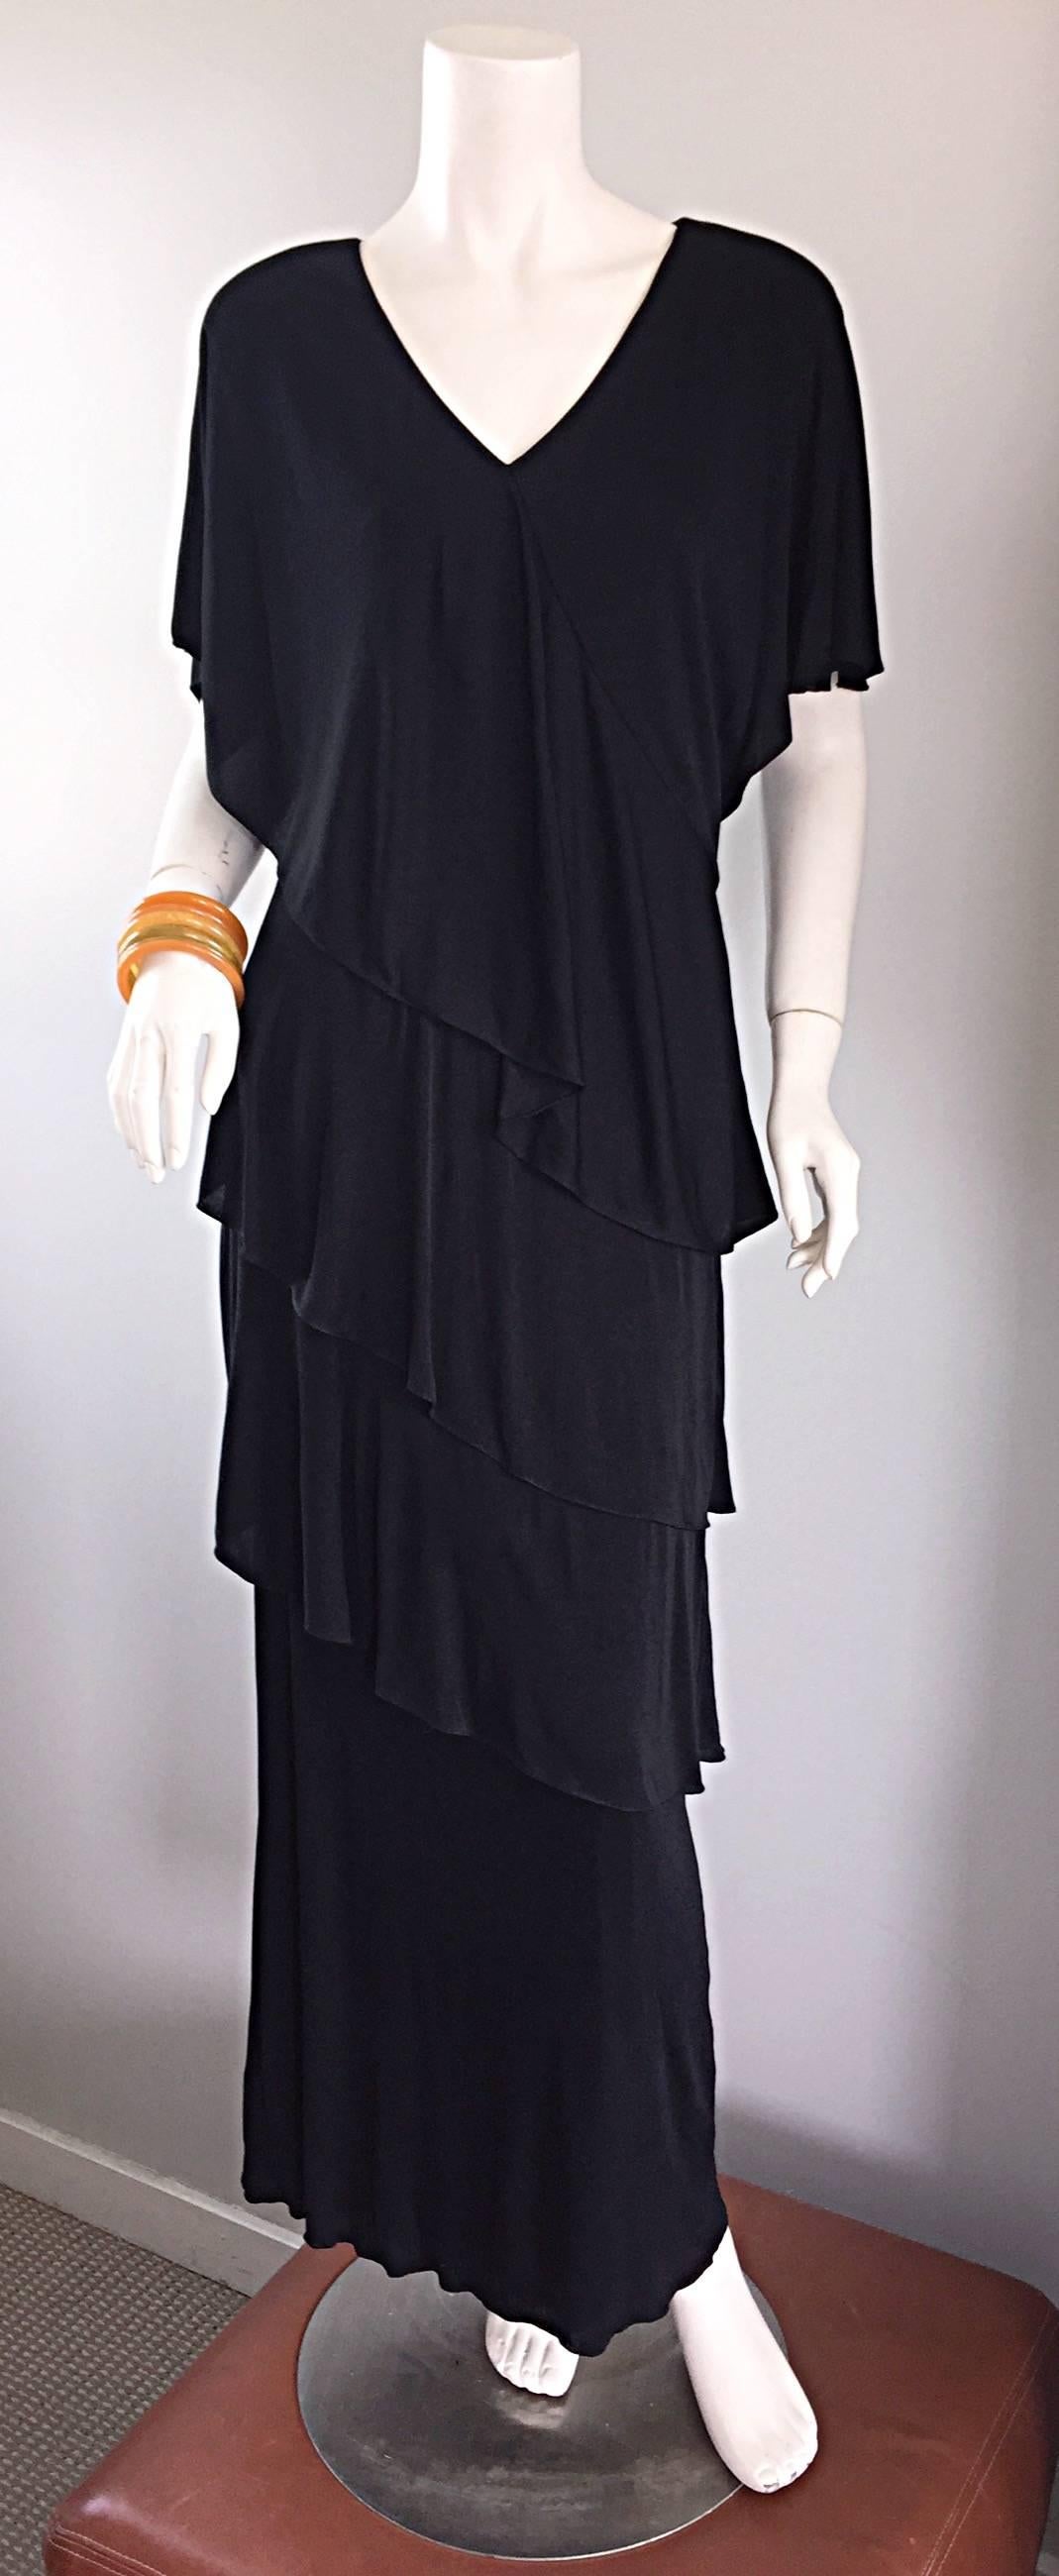 Vintage Holly's Harp Black Silk Jersey Signature Tiered Layered Boho Dress Gown 3